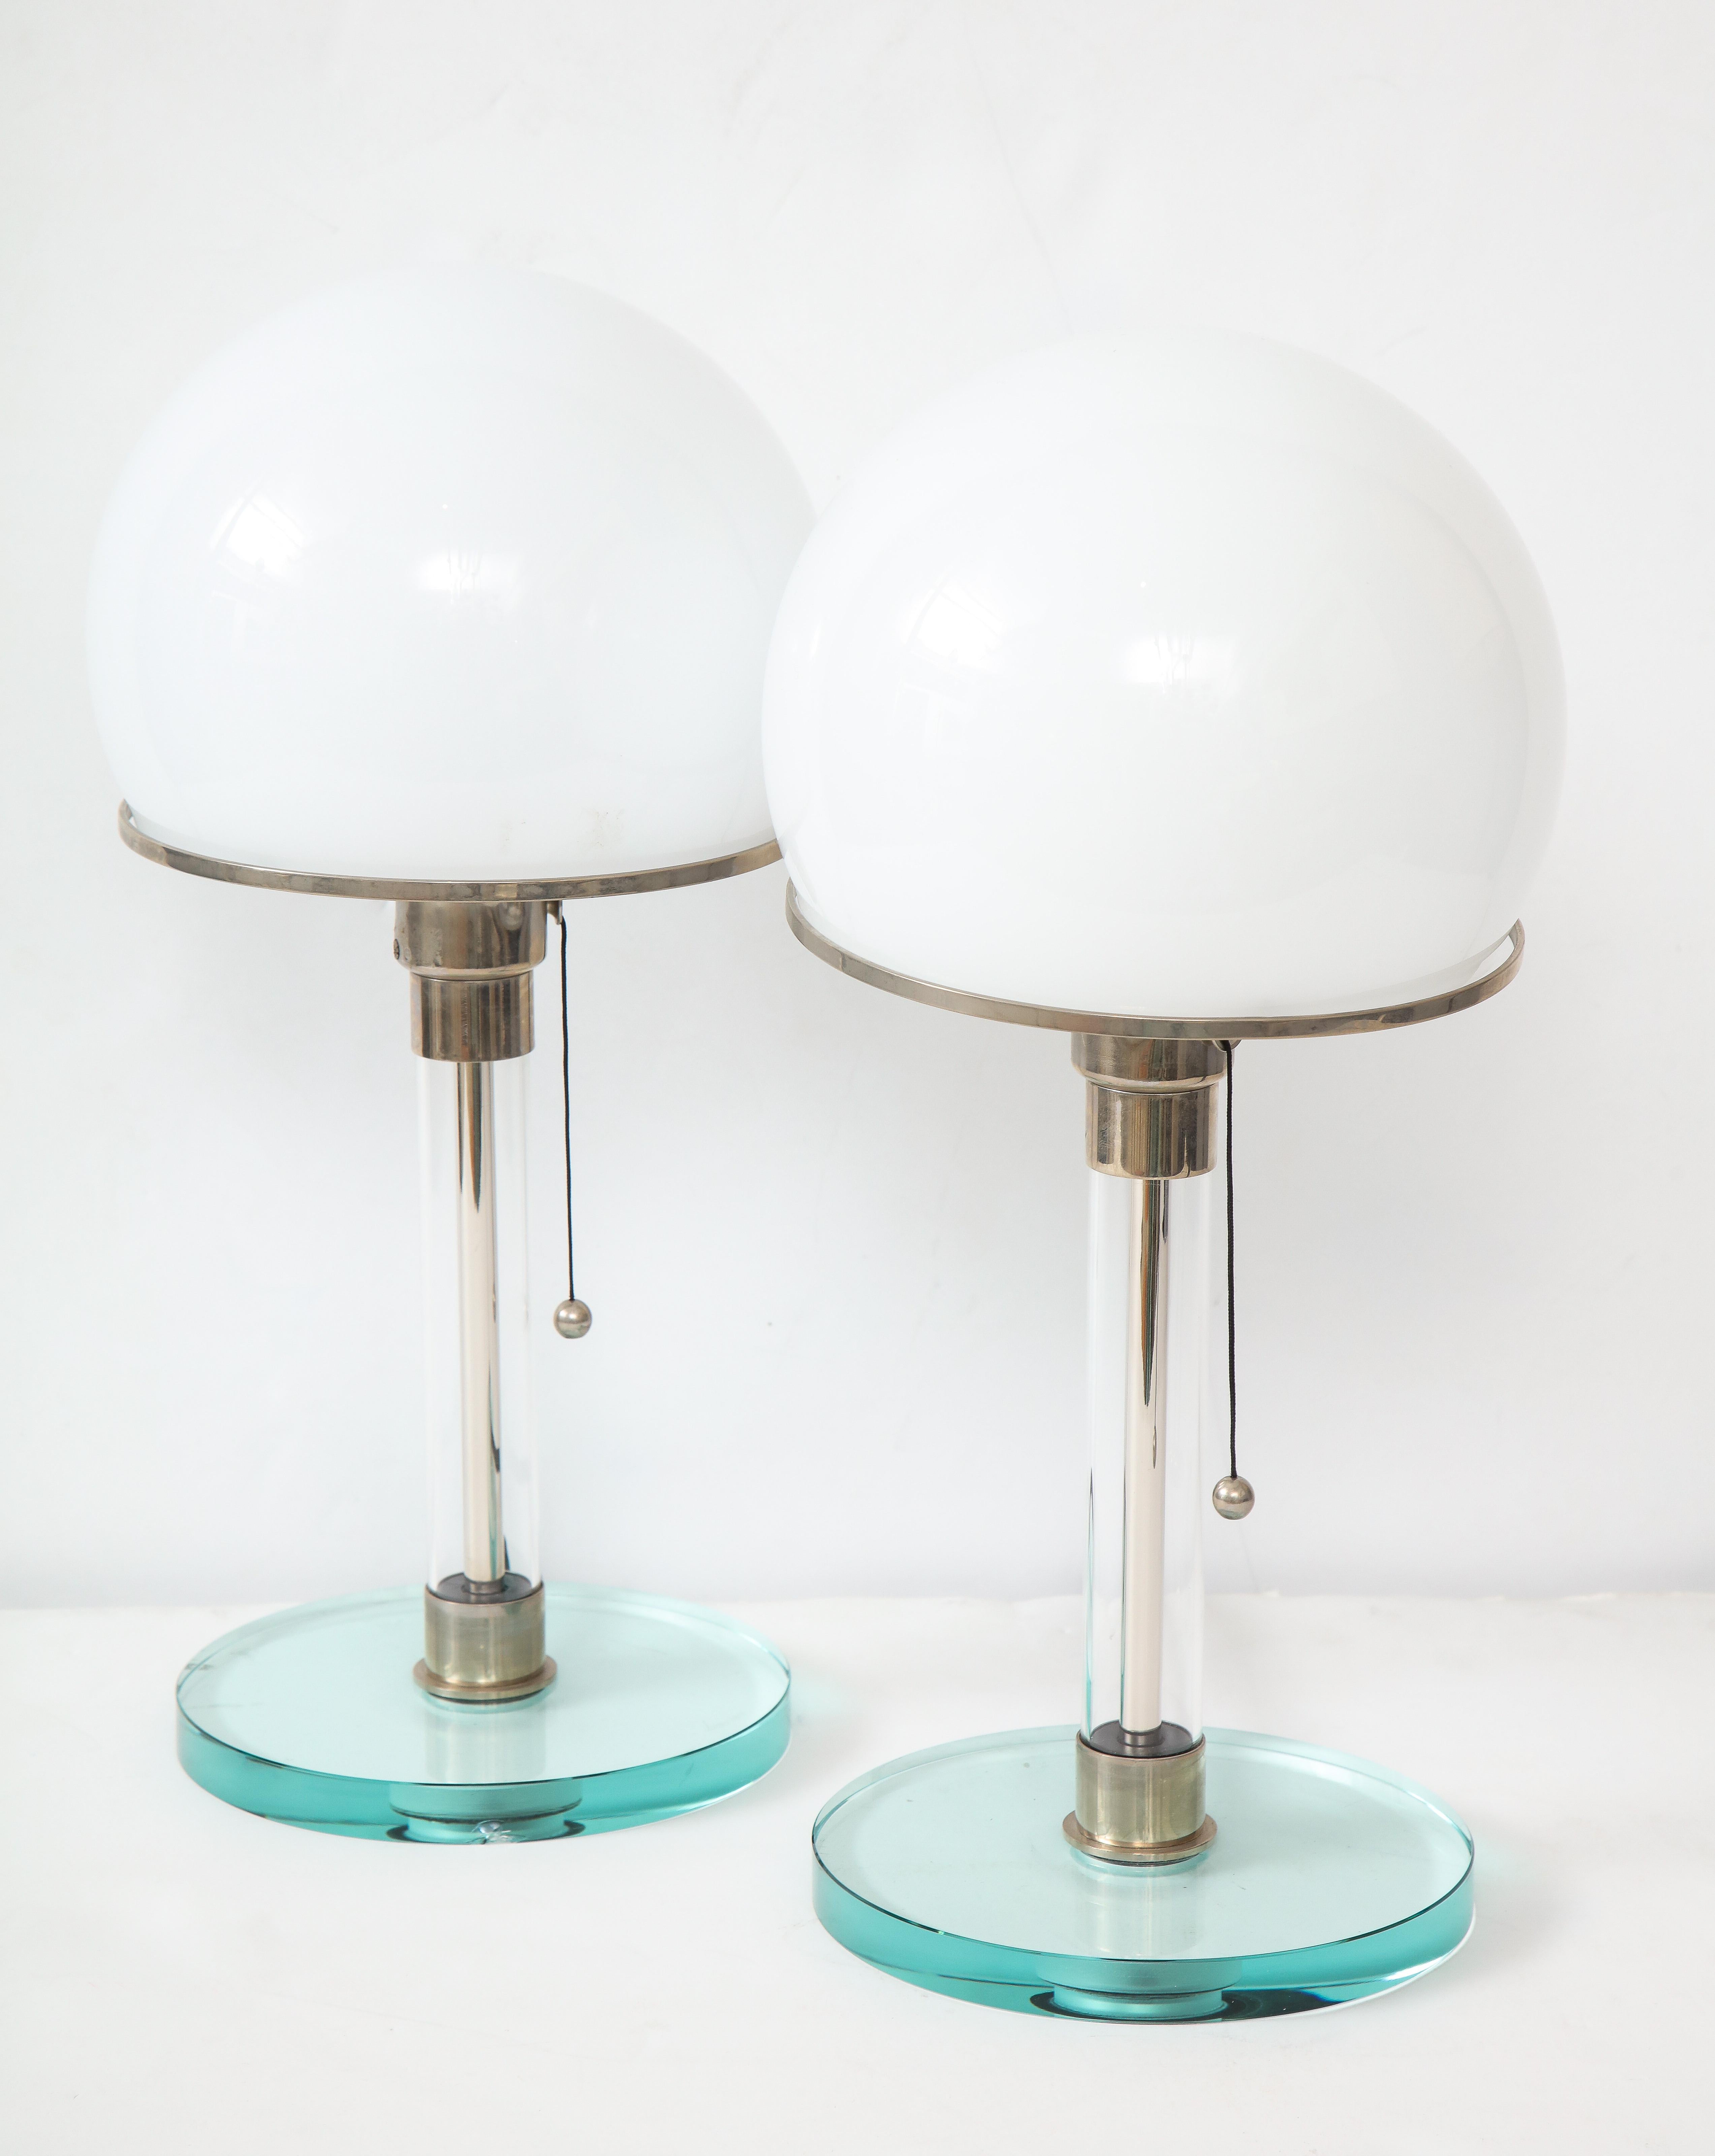 20th Century Pair of Table Lamps after the Design by Wilhelm Wagenfeld